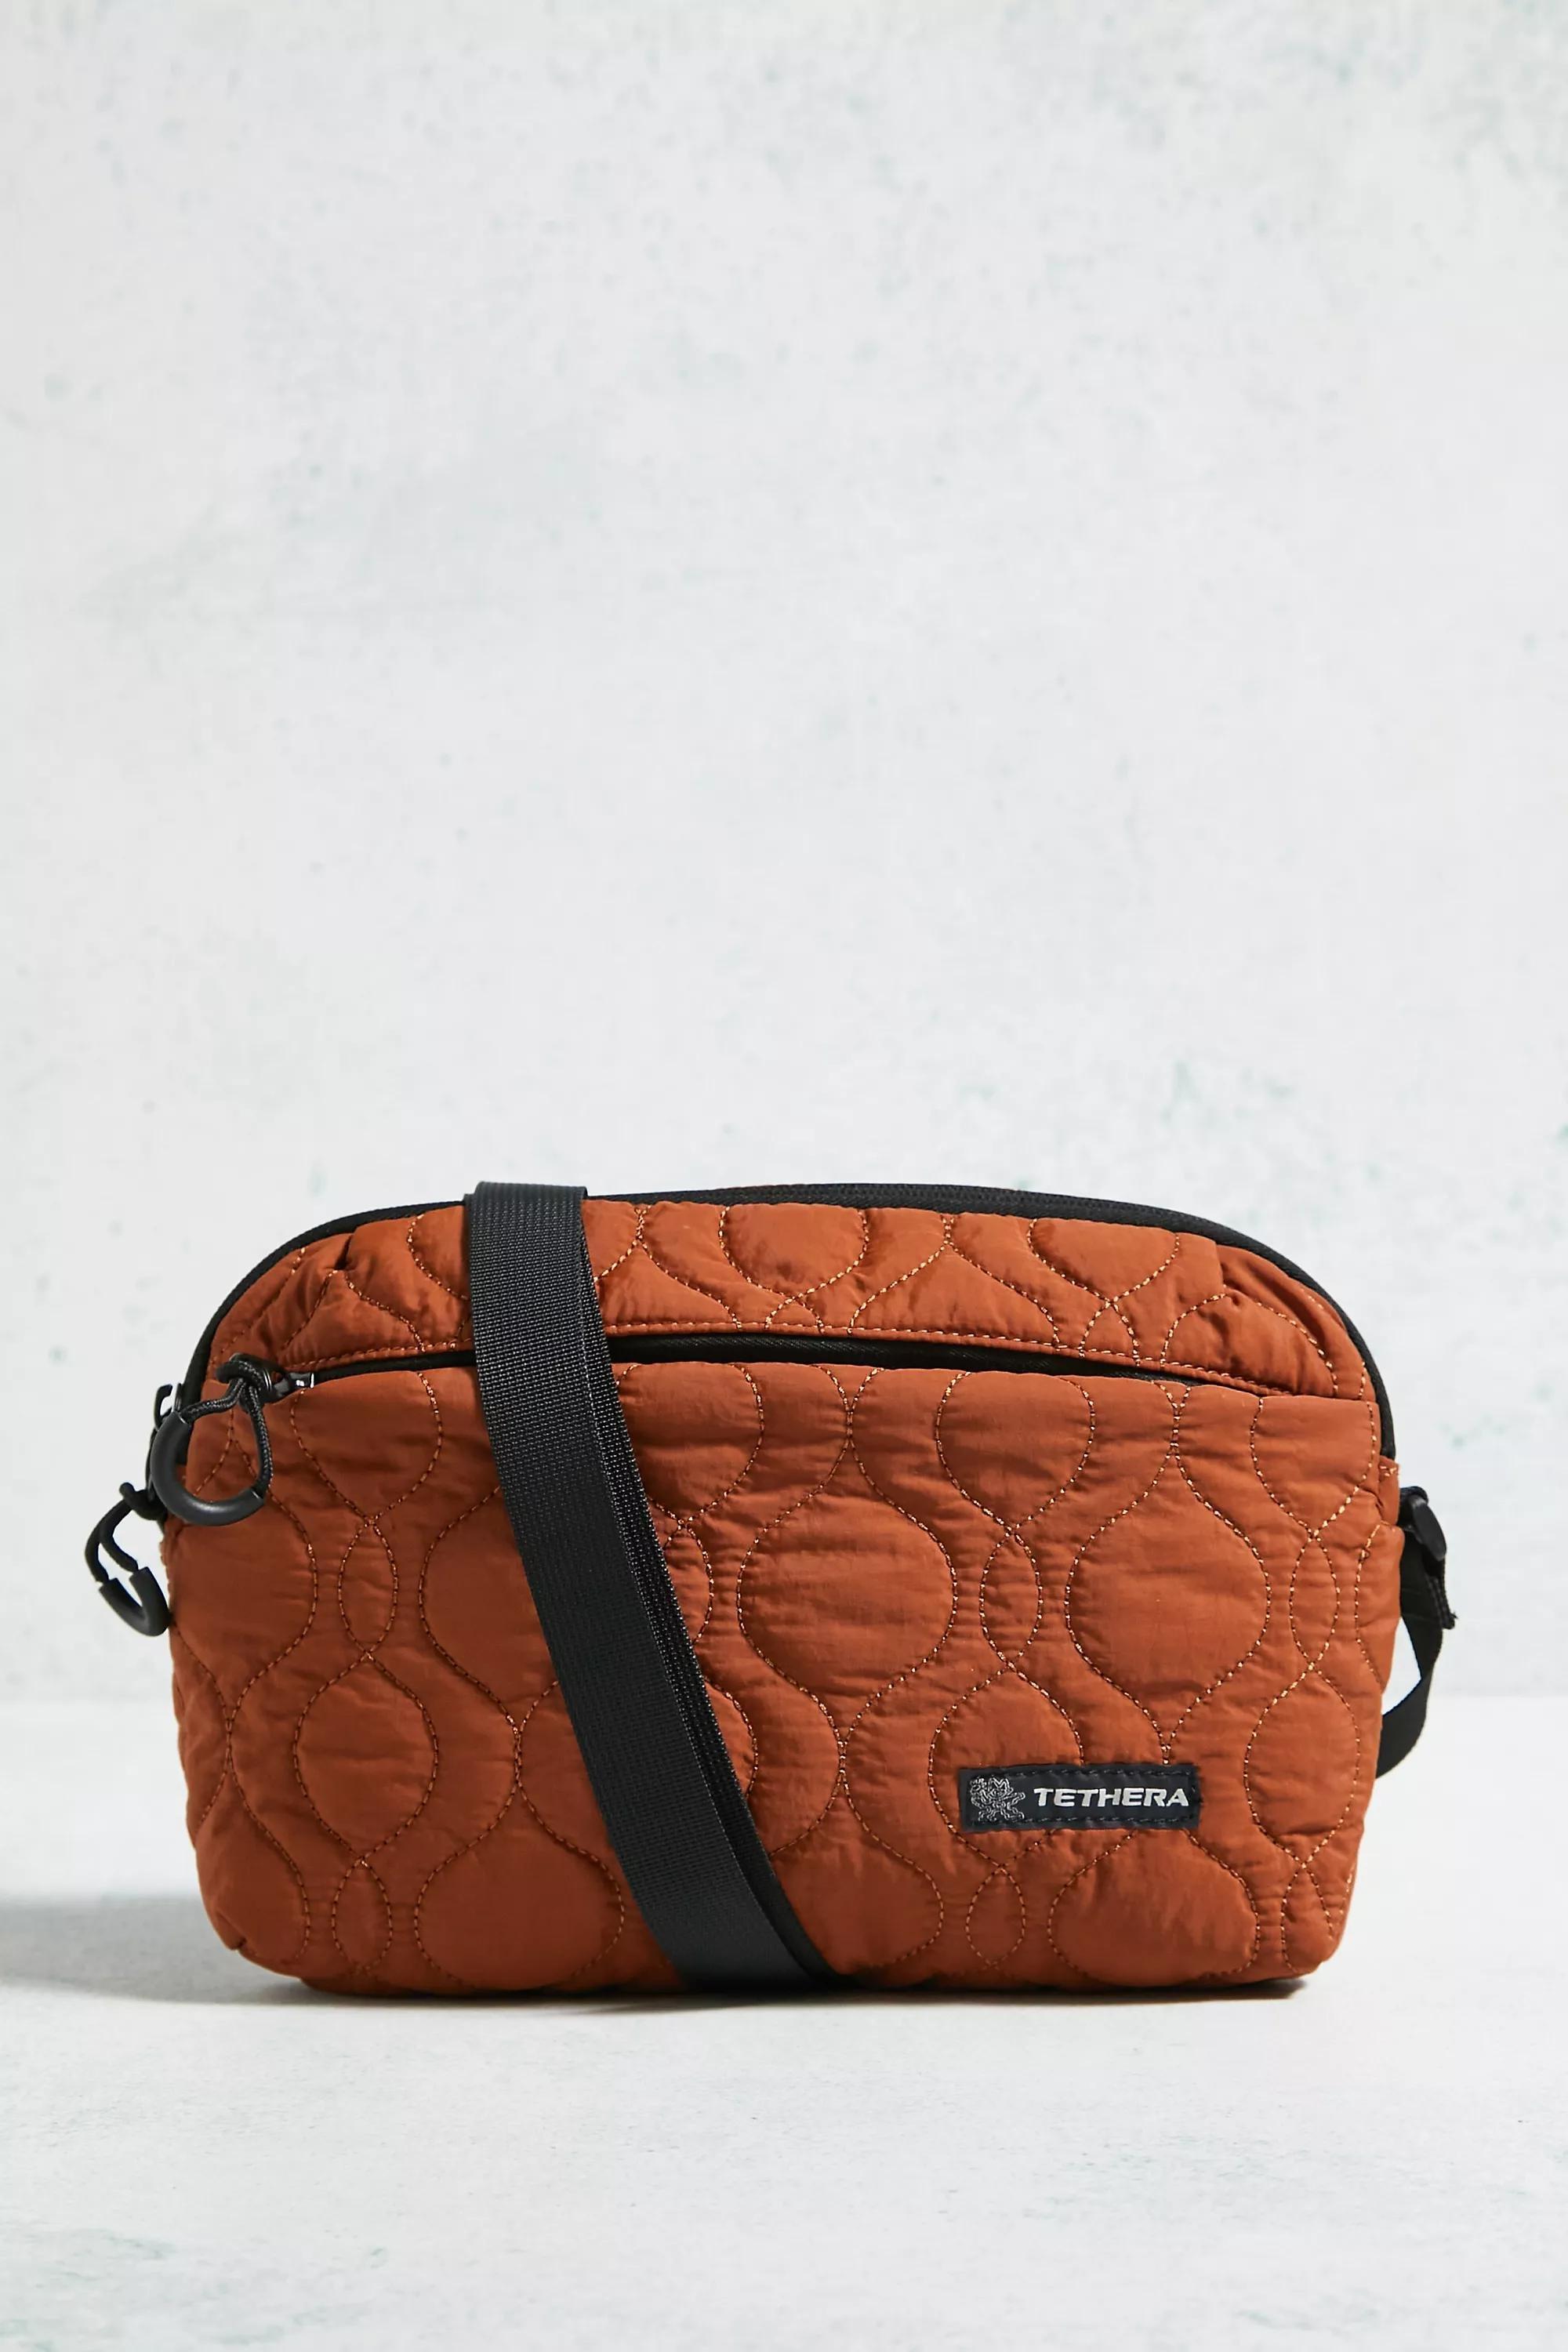 Urban Outfitters - Orange D Uo Nomad Orange Onion Quilted Crossbody Bag